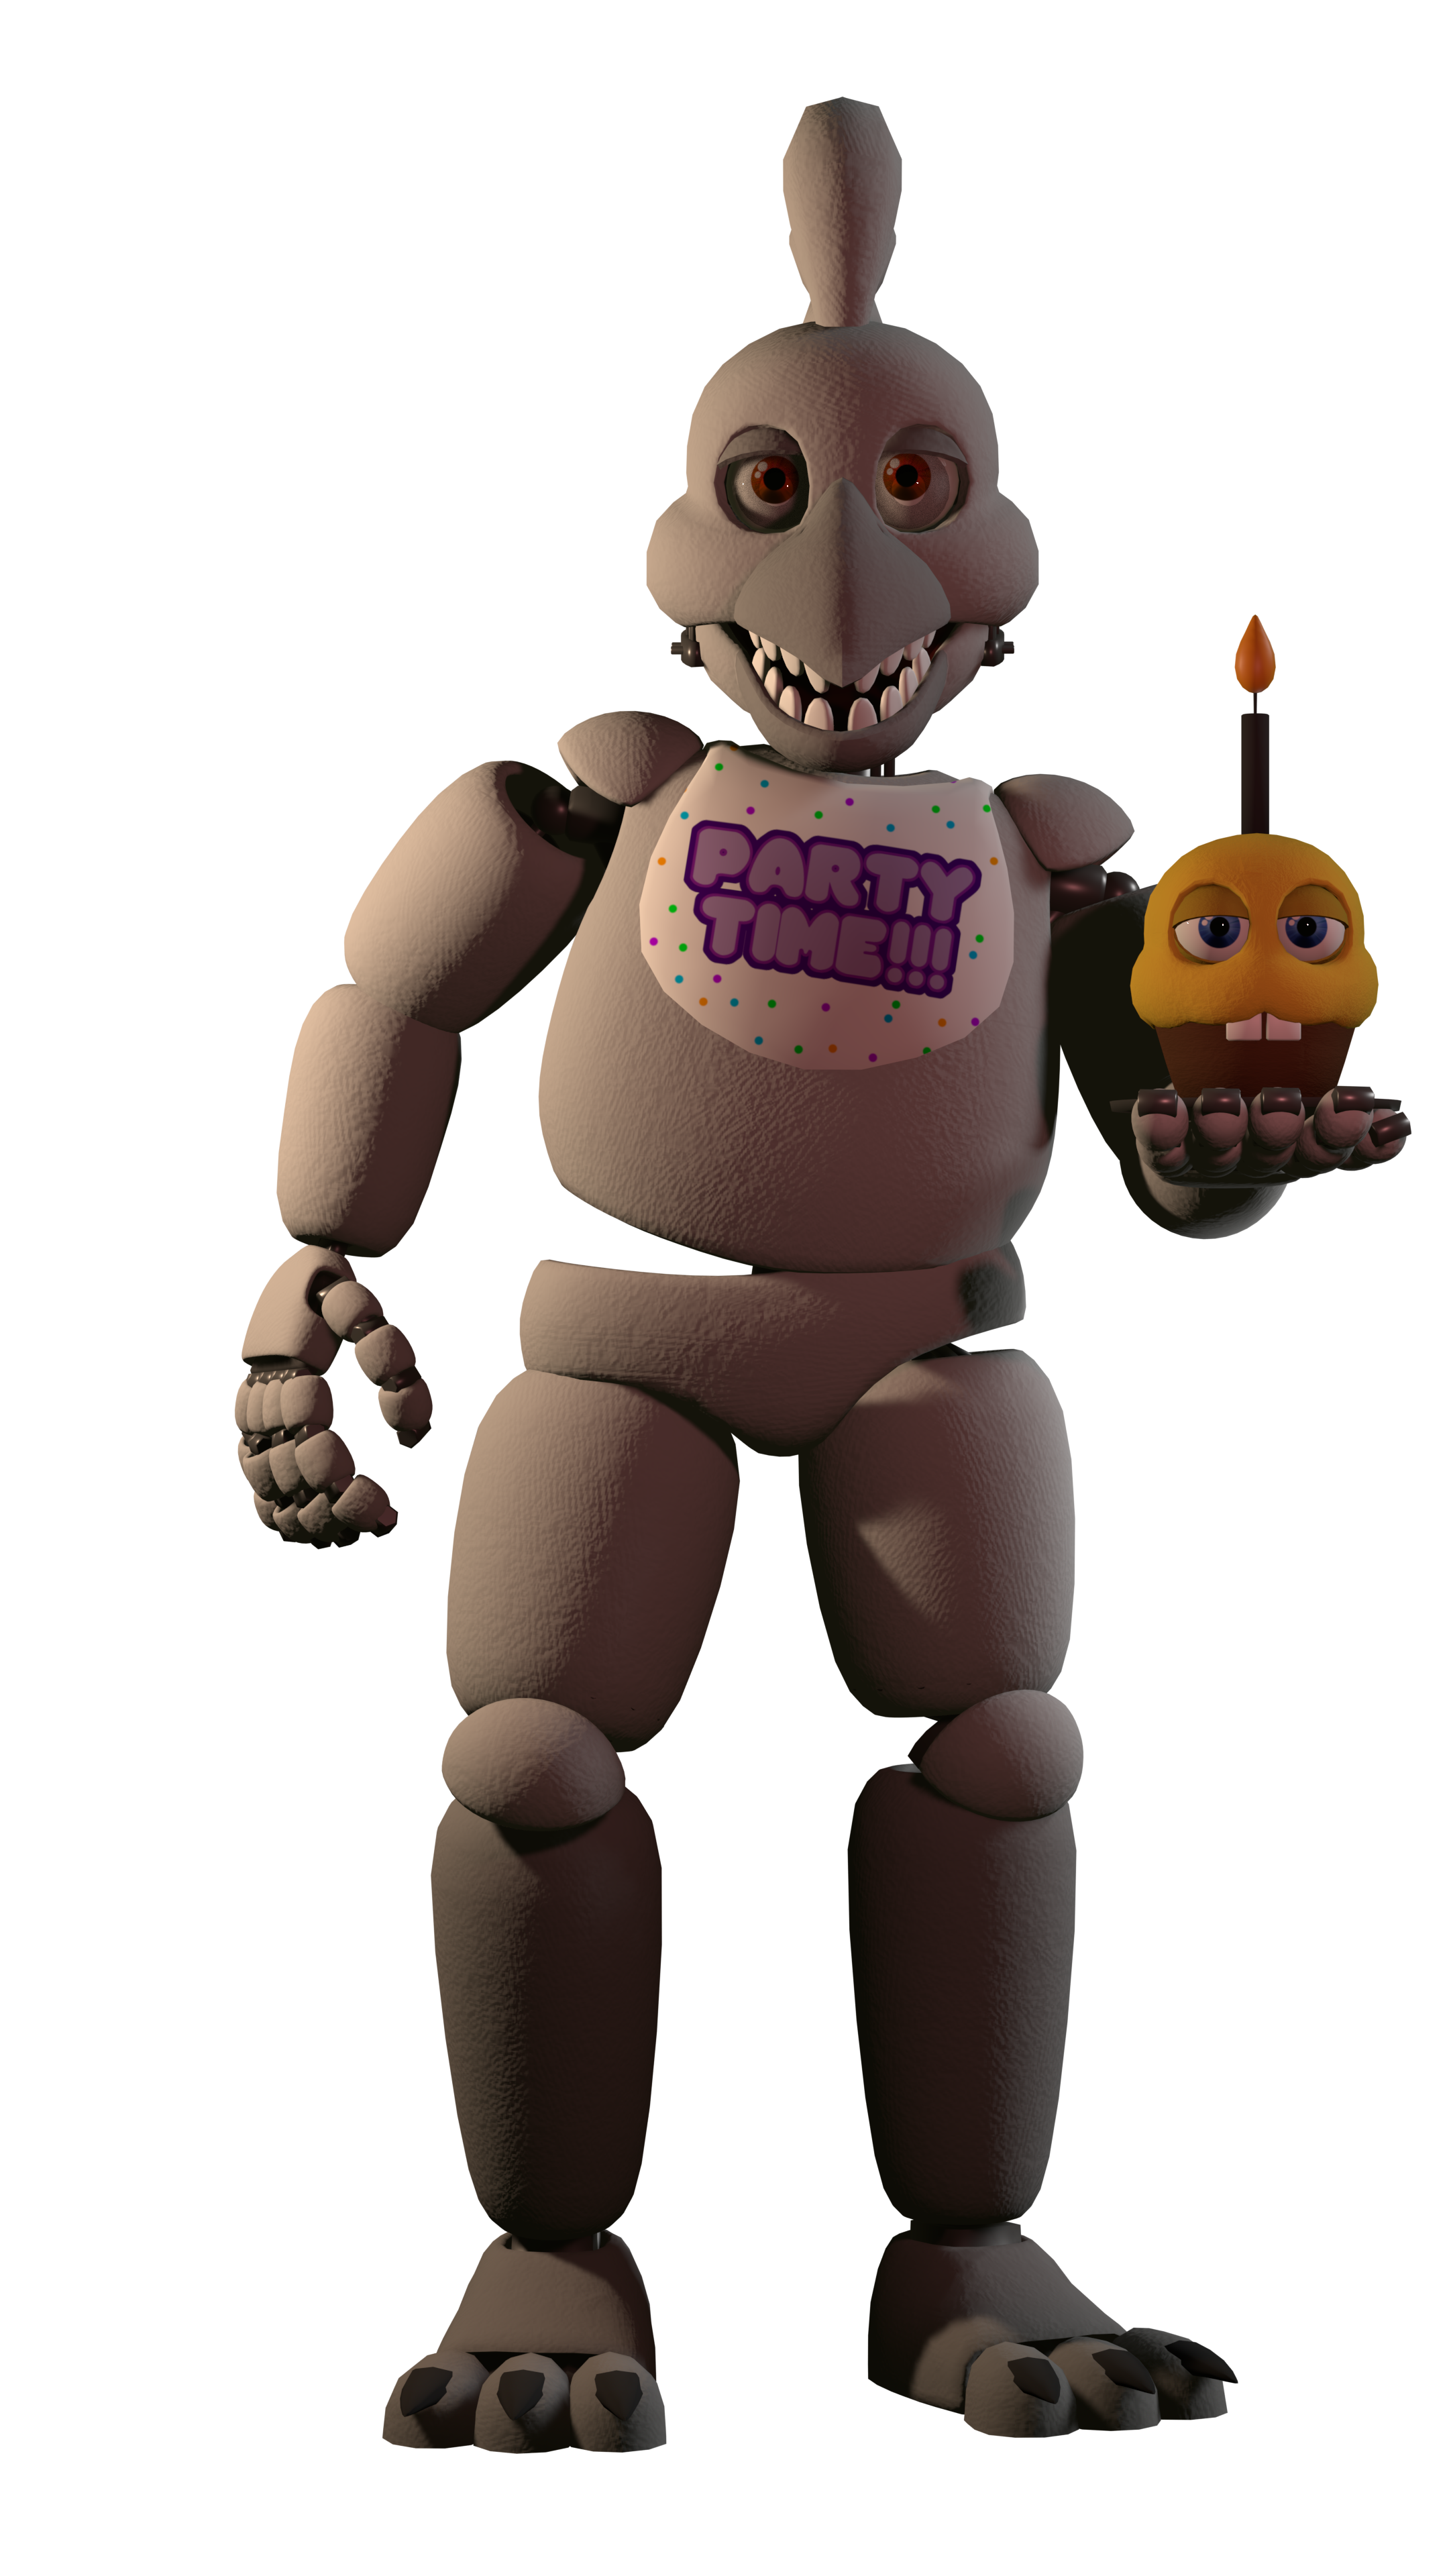 Withered Chica's arms not stuck after all? : r/fivenightsatfreddys